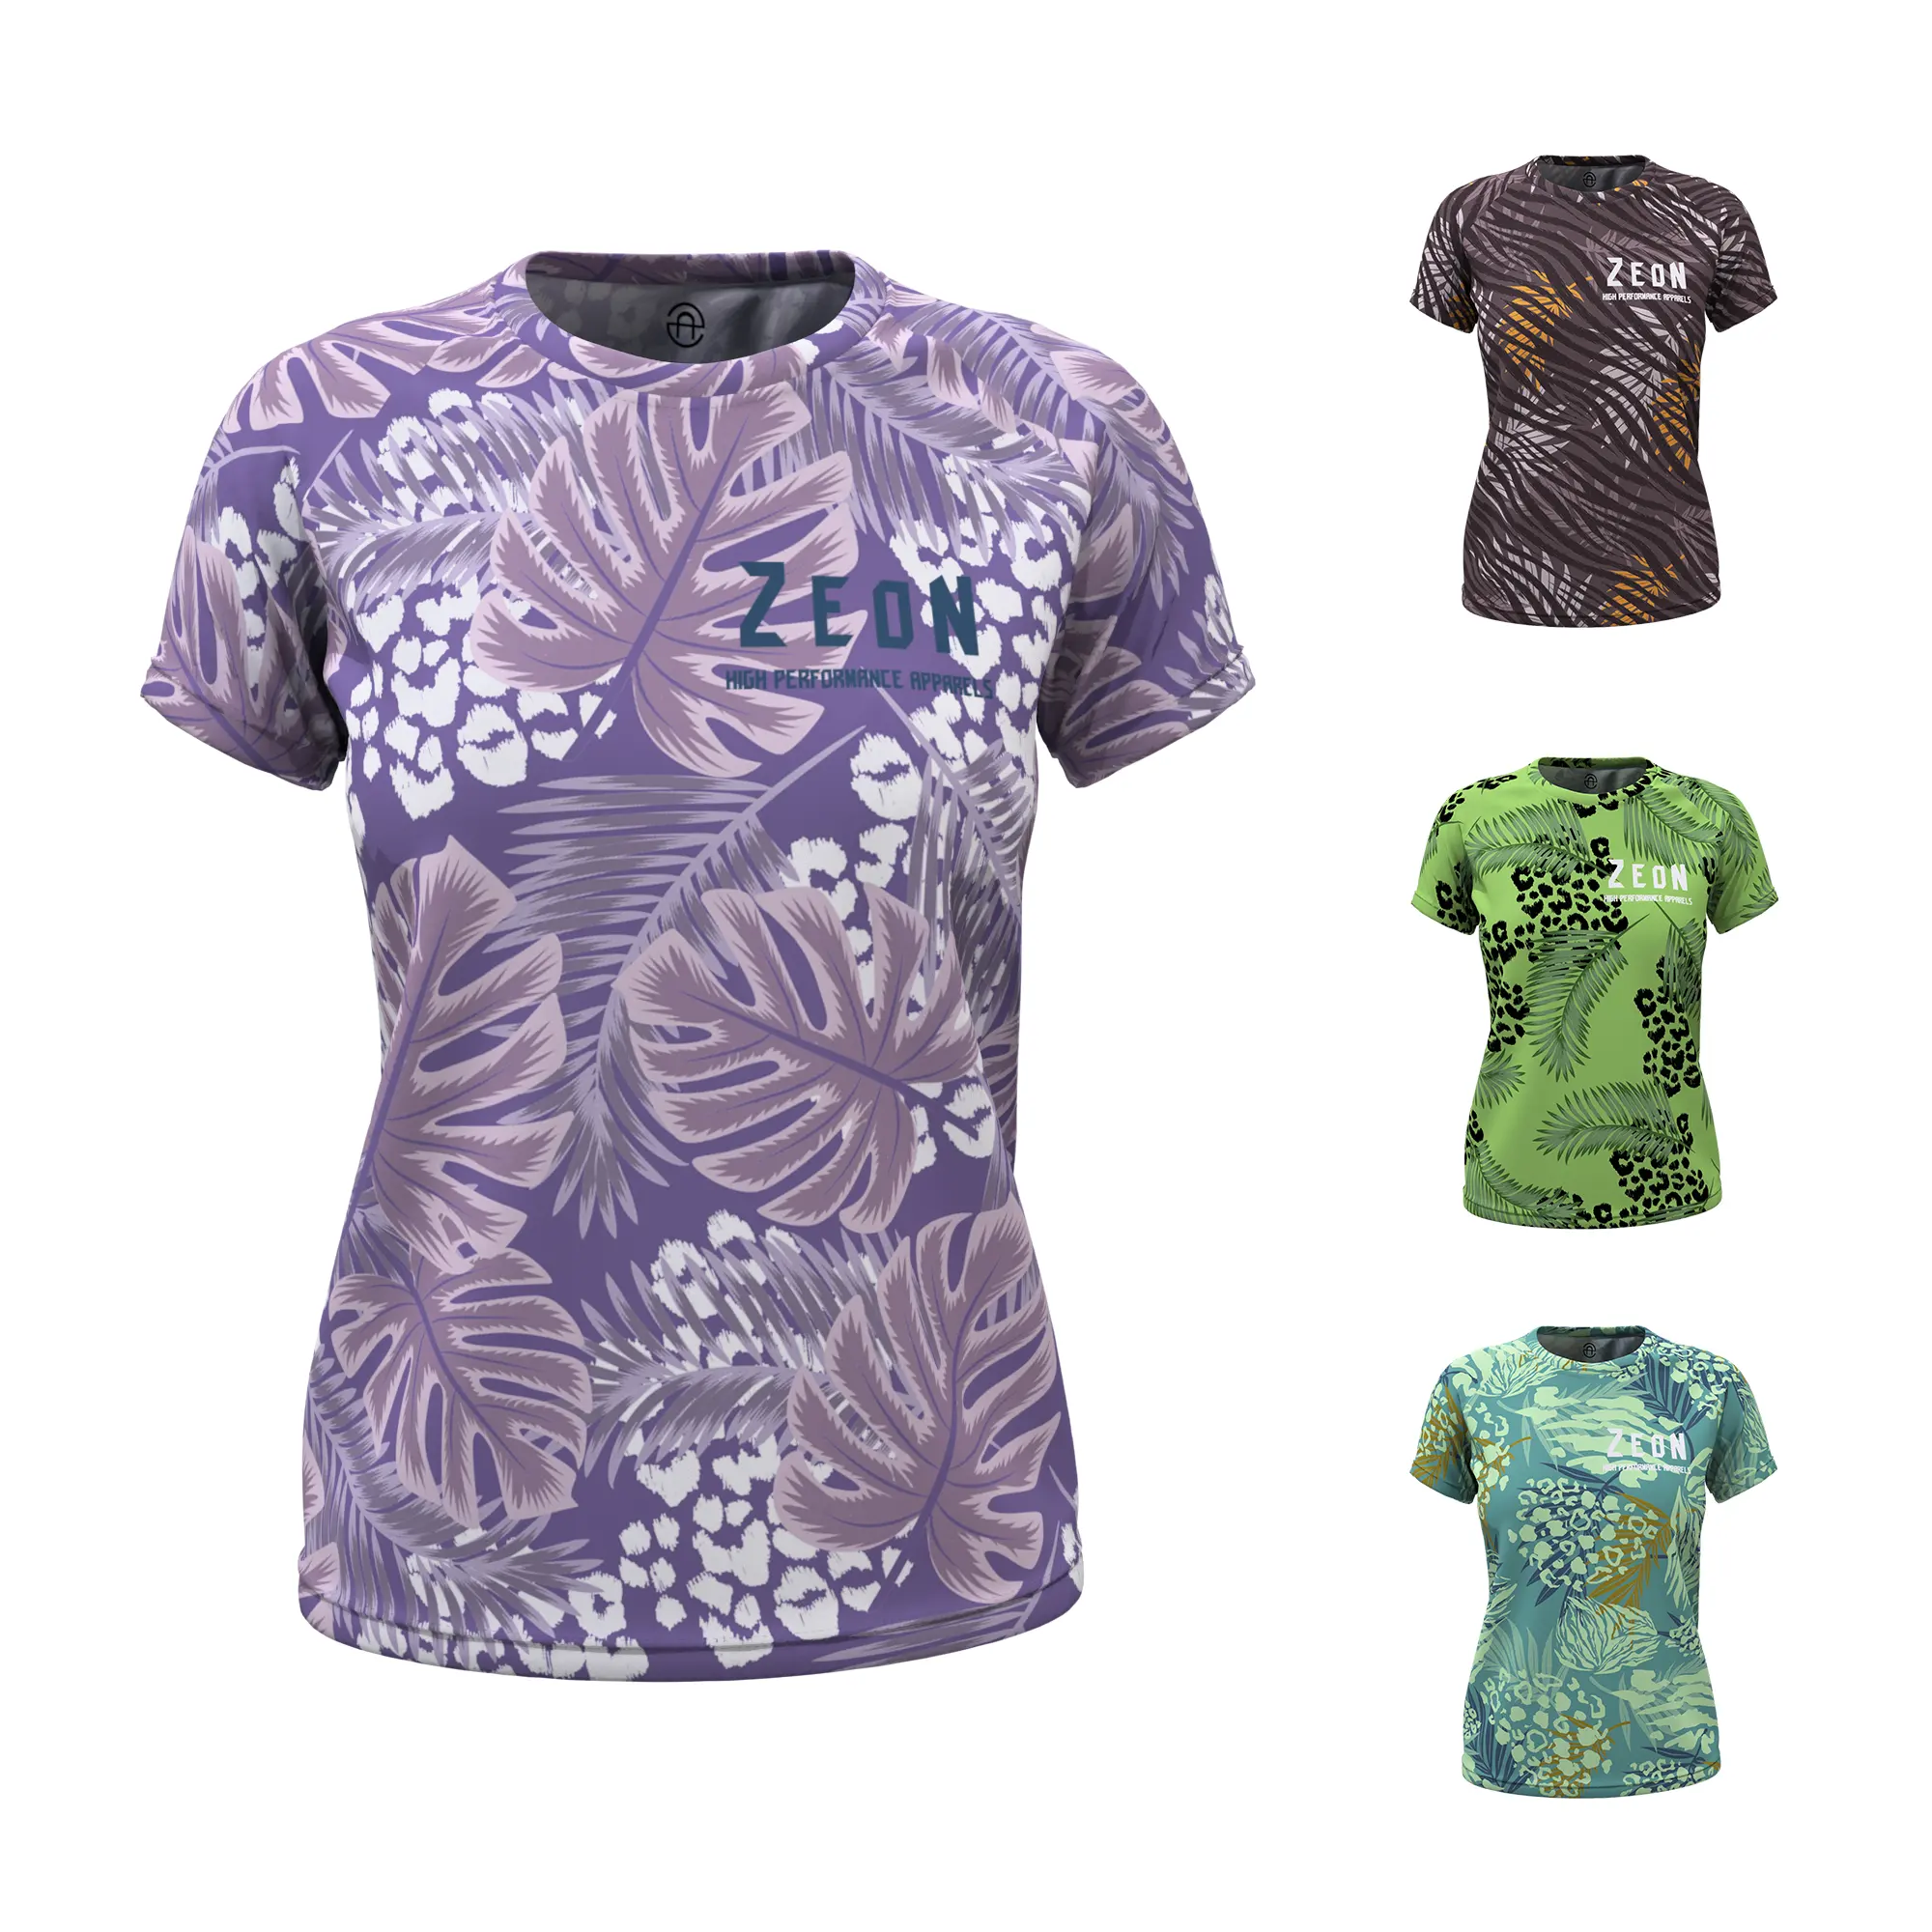 New arrival women's running shirts custom make sublimated ladies Quick dry T shirts